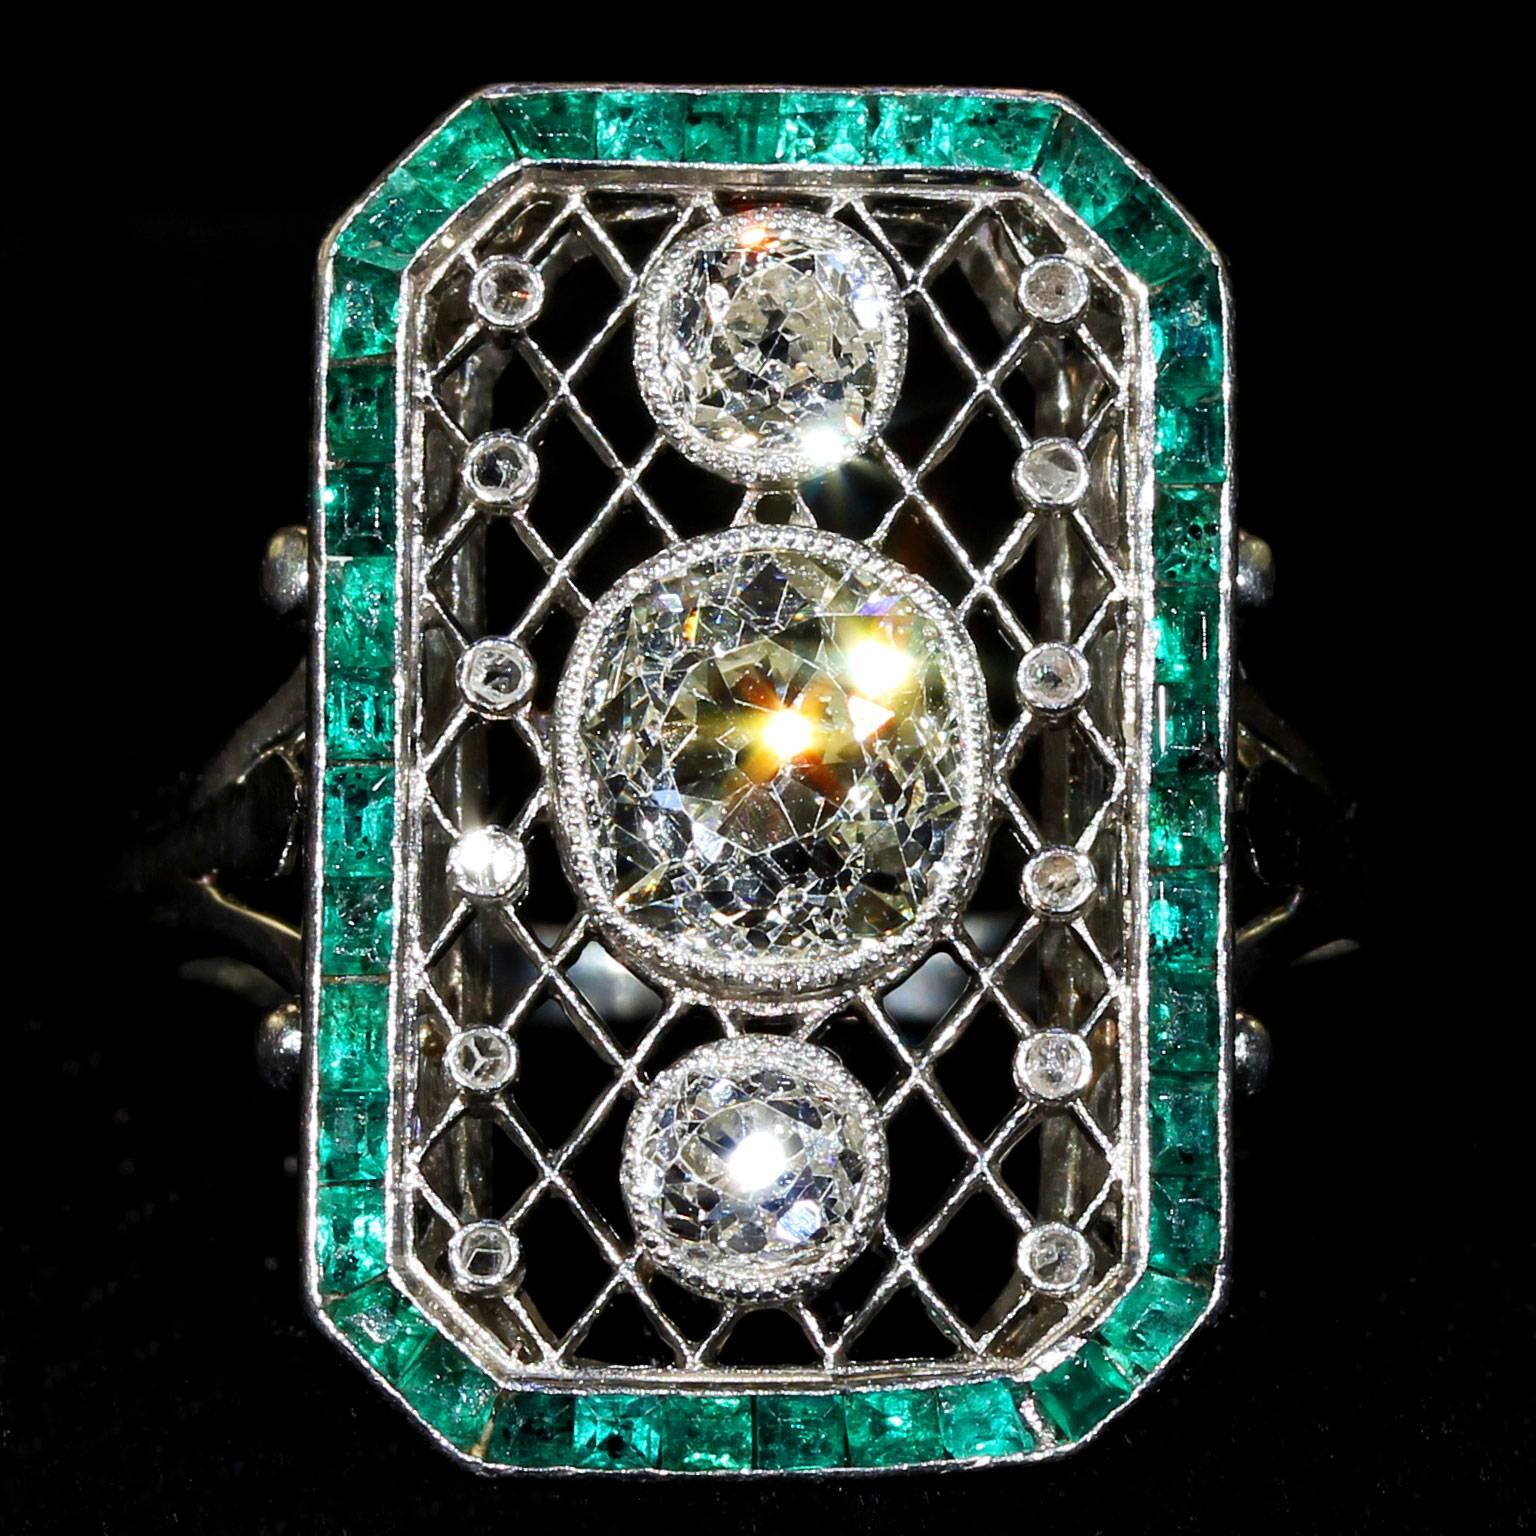 This circa 1910 French ring was hand crafted in Platinum with a rectangular low profile gallery. Three large center diamonds surrounded by a Platinum lattice work and a boarder of calibre cut natural Emeralds. Accenting the lattice work are two rows